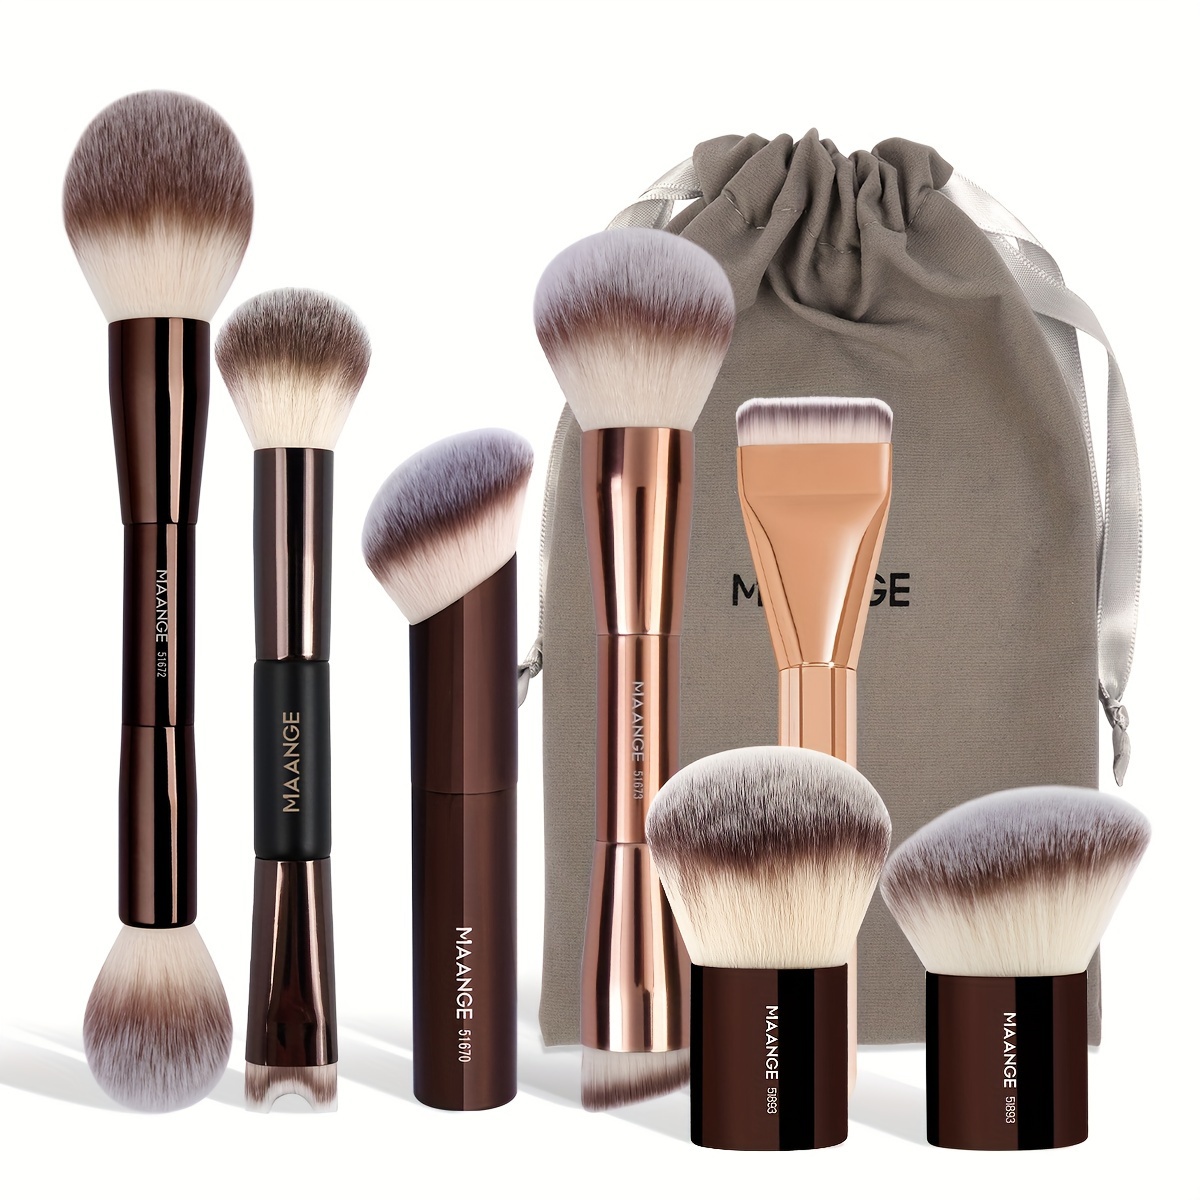 

multi-use" Maange 7-piece Makeup Brush Set With Soft Nylon Bristles - Includes Foundation, Blush, Contour Brushes & Velvet Pouch - Perfect For Beginners & Travel